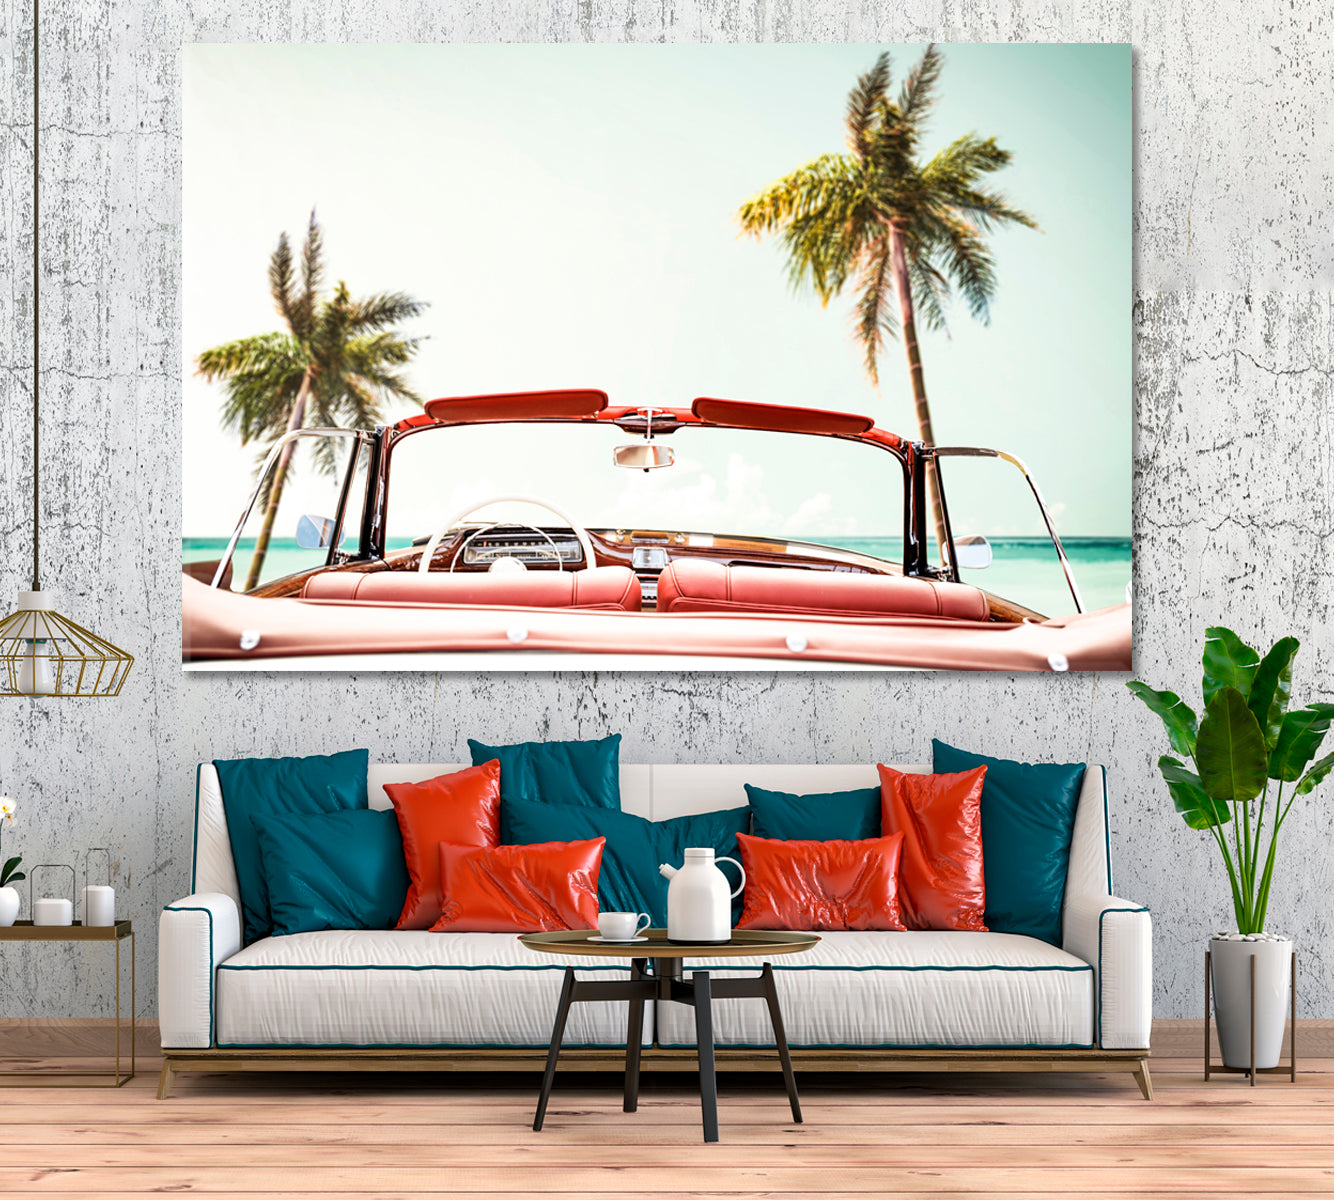 Summer Car on Beach With Palm Canvas Print ArtLexy 1 Panel 24"x16" inches 